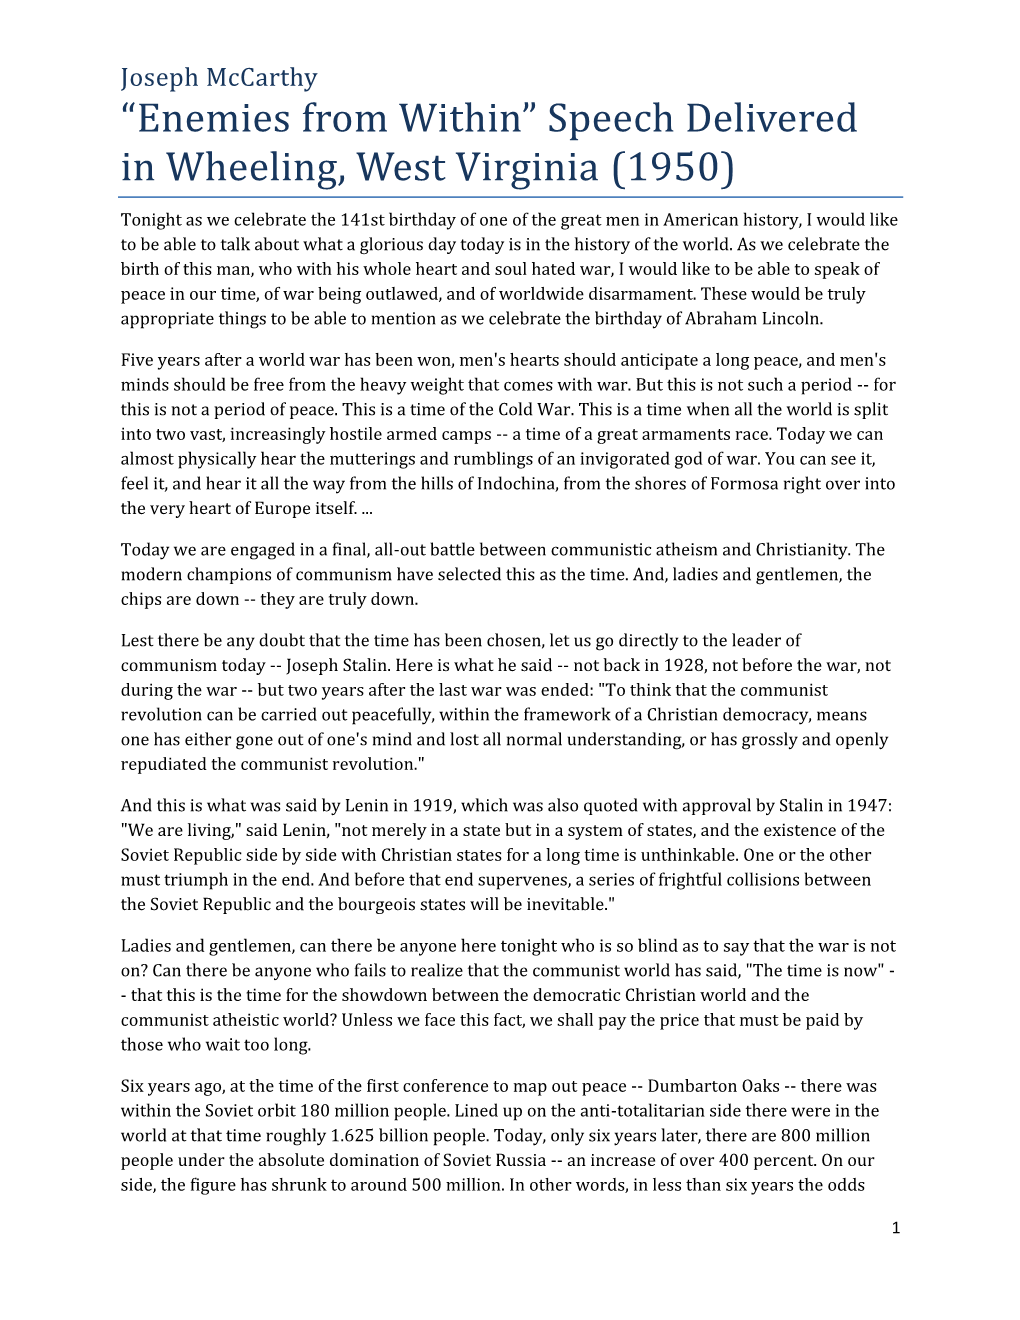 “Enemies from Within” Speech Delivered in Wheeling, West Virginia (1950)